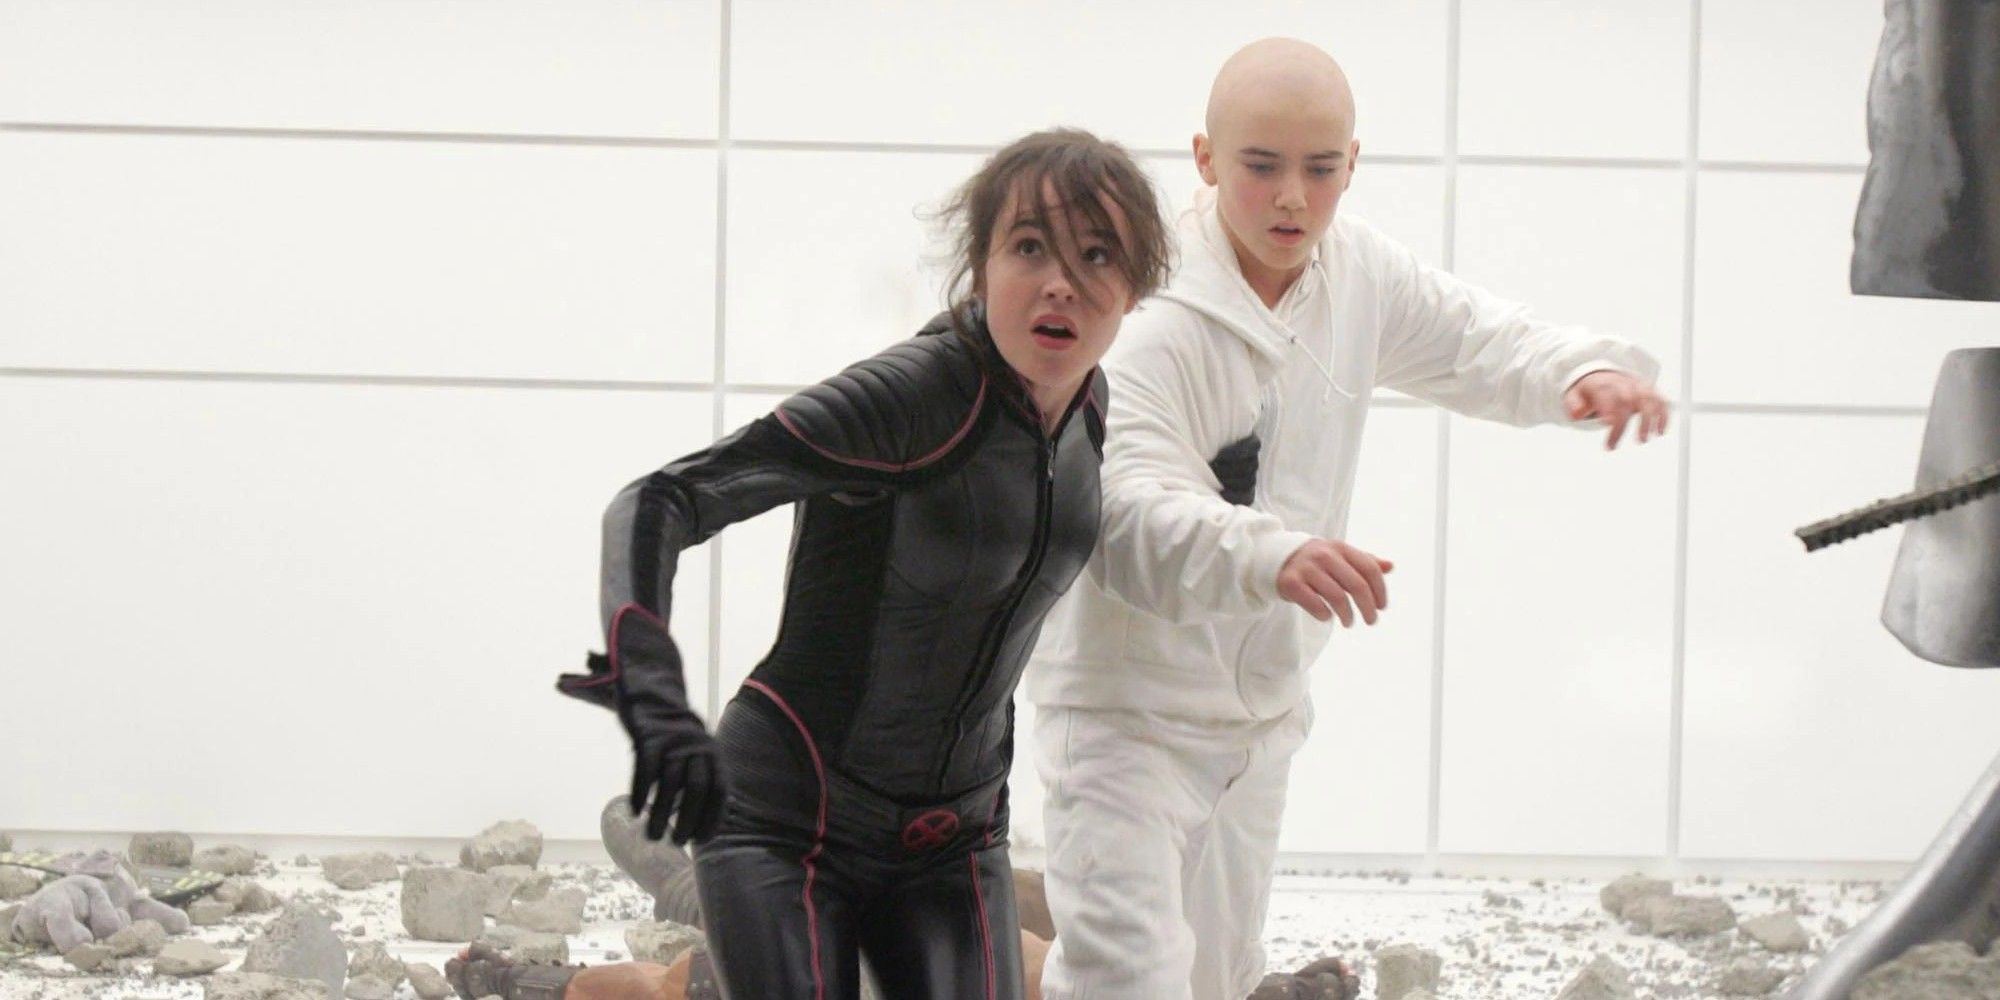 Kitty Pryde helps Leech out from containment in X-Men The Last Stand